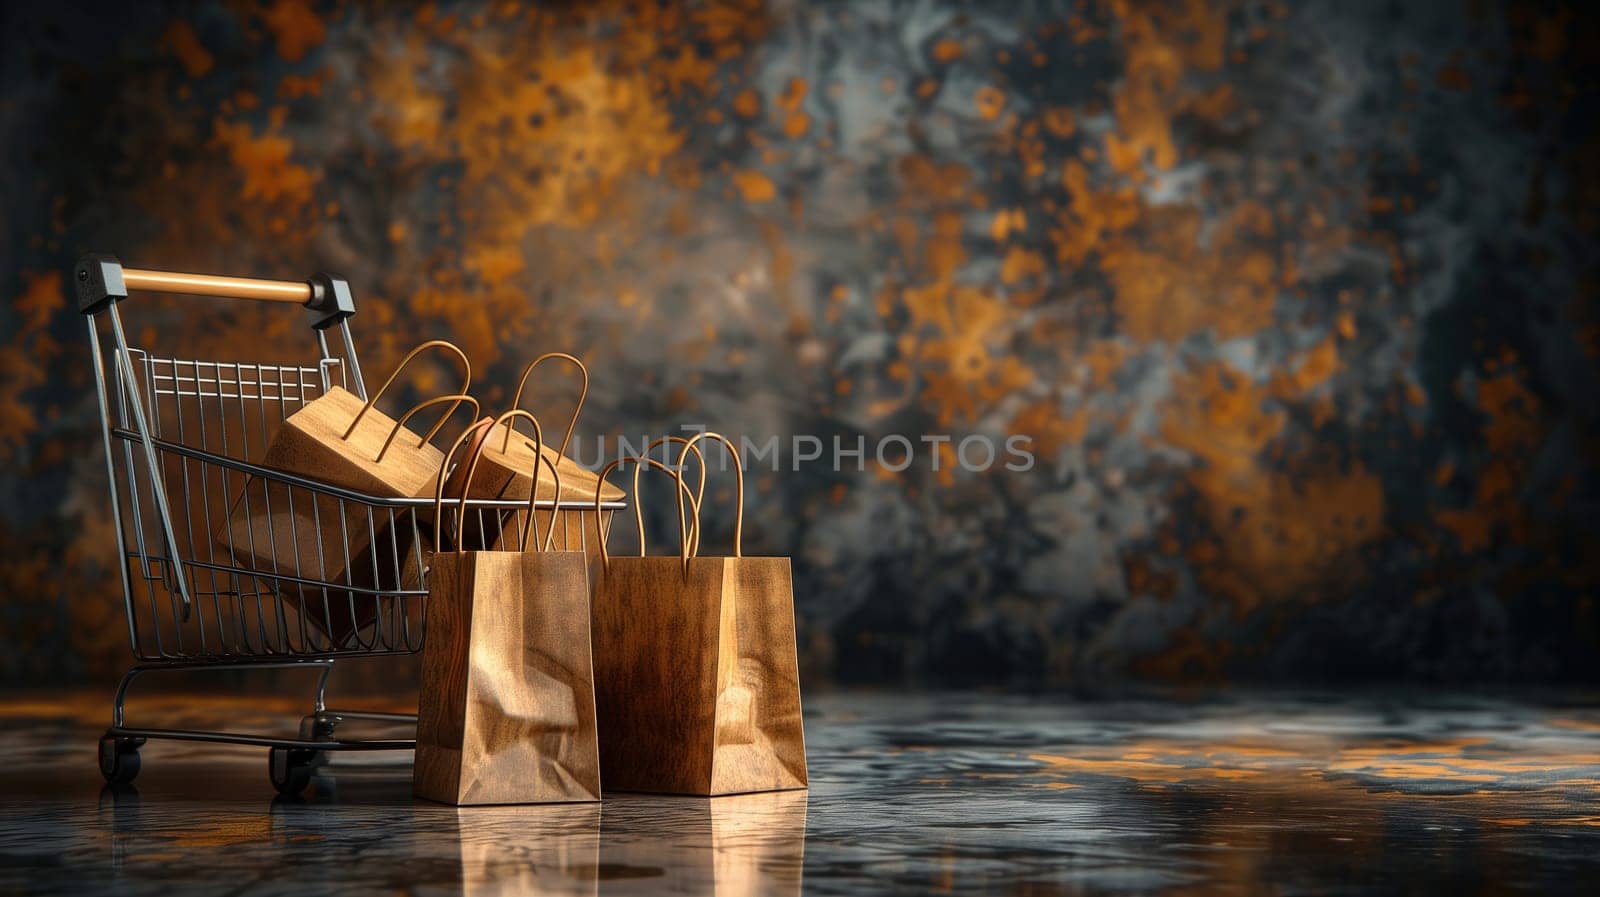 A shopping cart overflowing with shopping bags sits atop a wet floor, indicating a successful shopping trip during a sale or Black Friday event. The reflective surface of the water adds an interesting element to the composition.